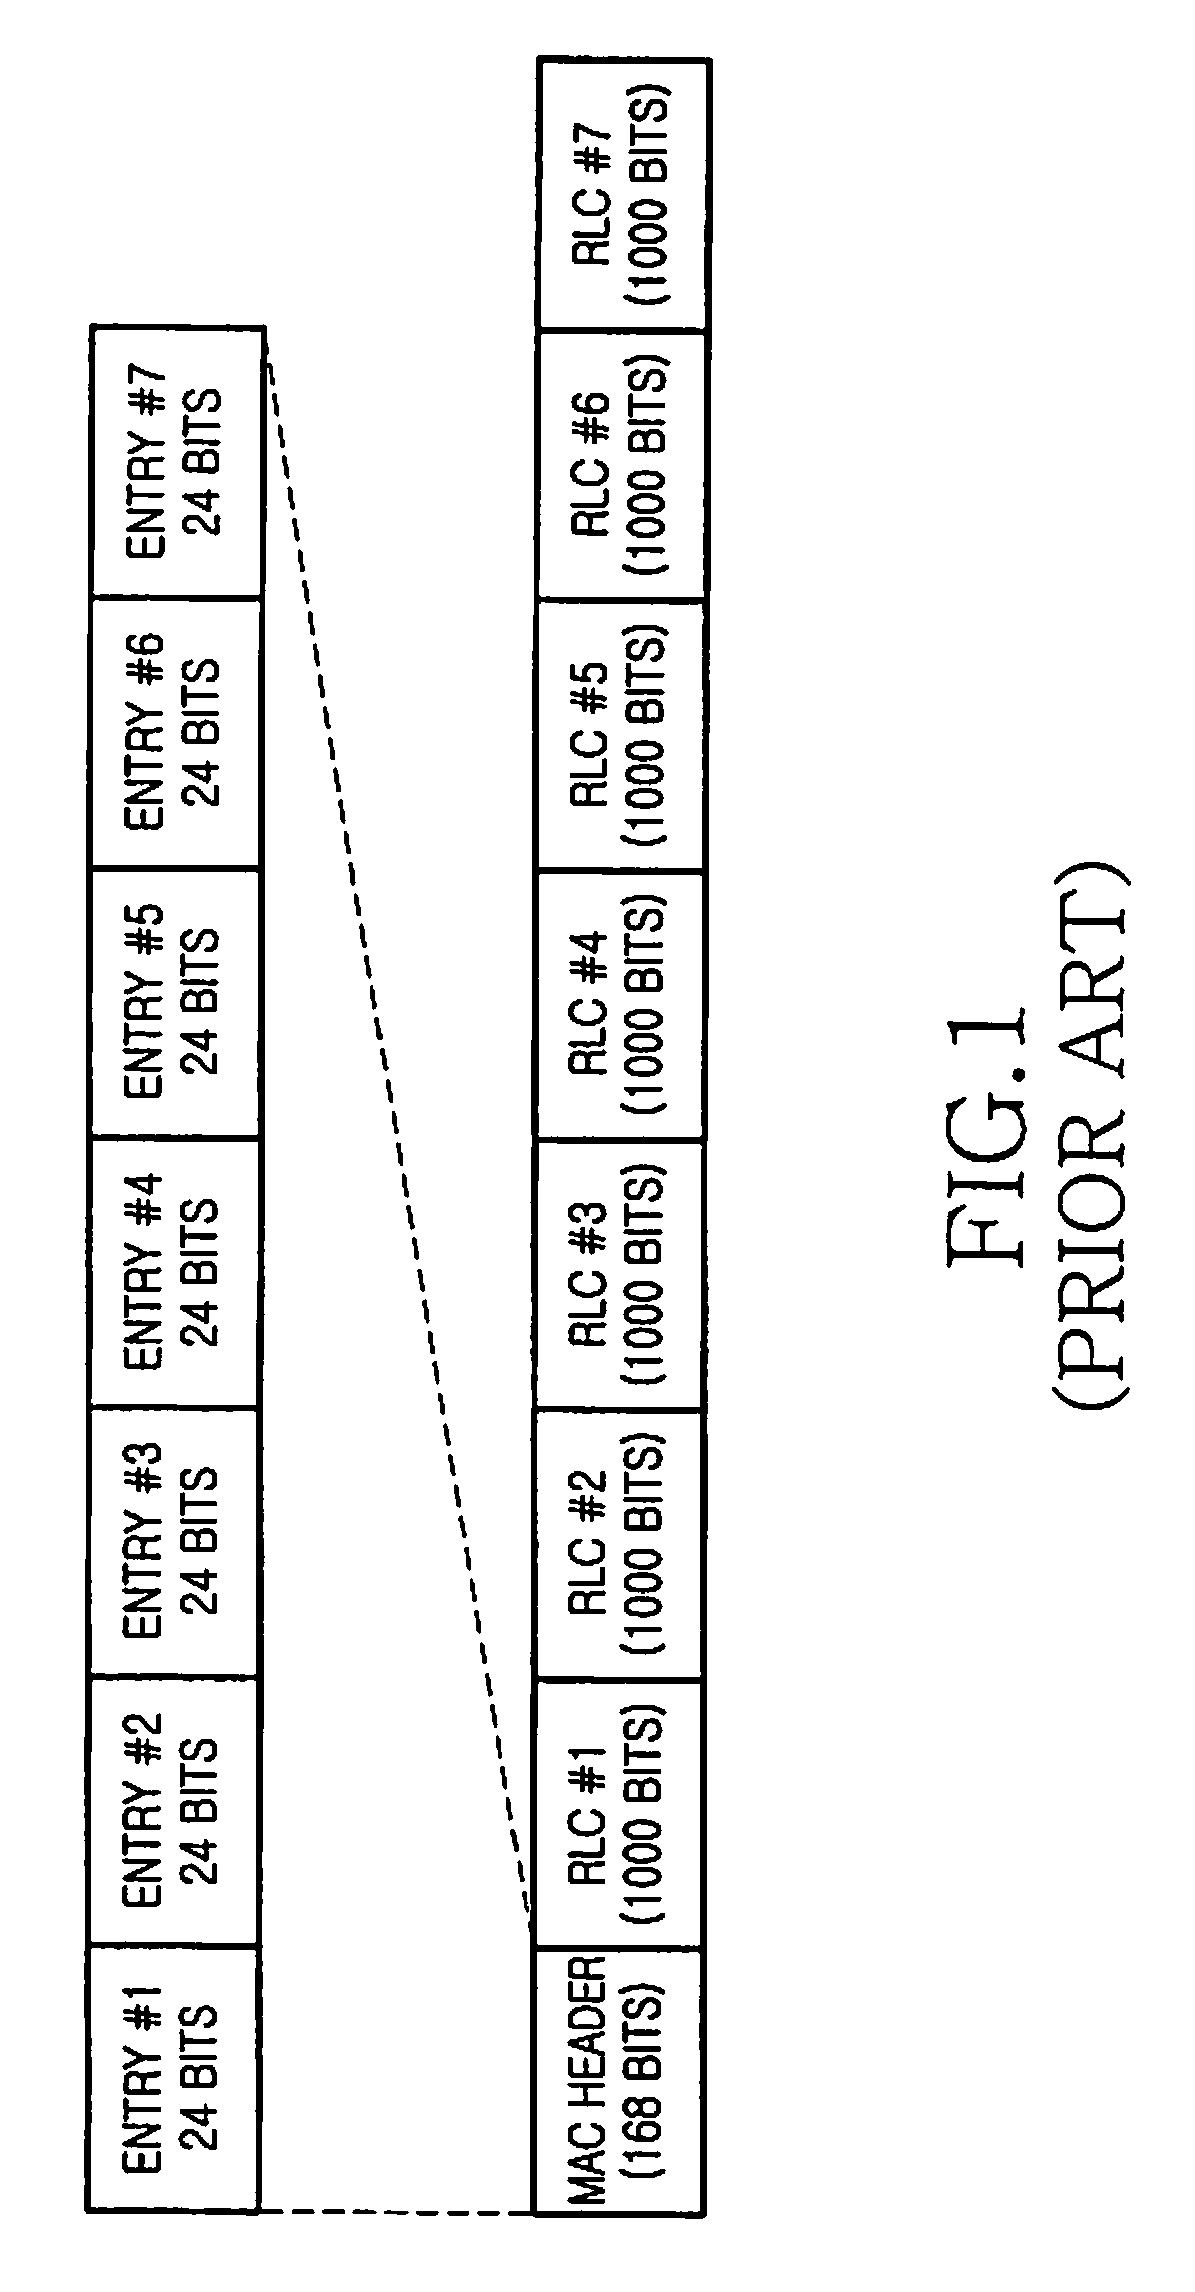 Method for enhancing layer 2 for a high speed packet access uplink